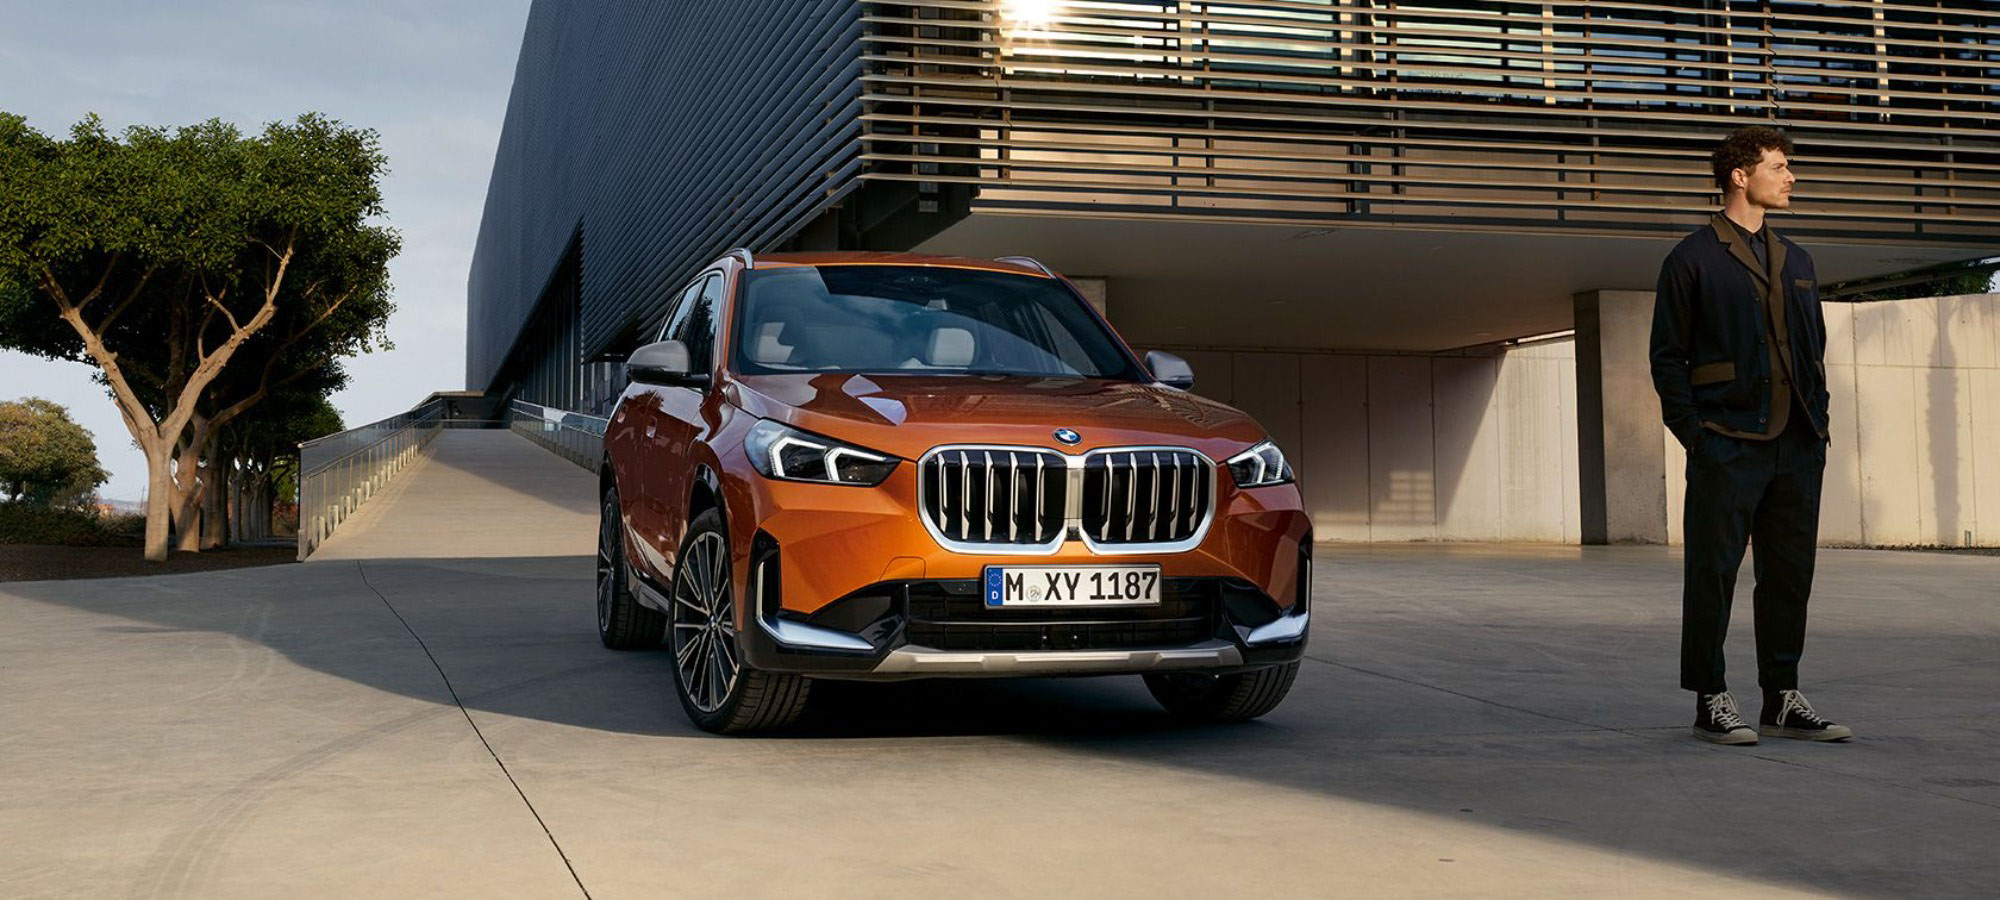 Versatile and Capable: The New BMW X1 7